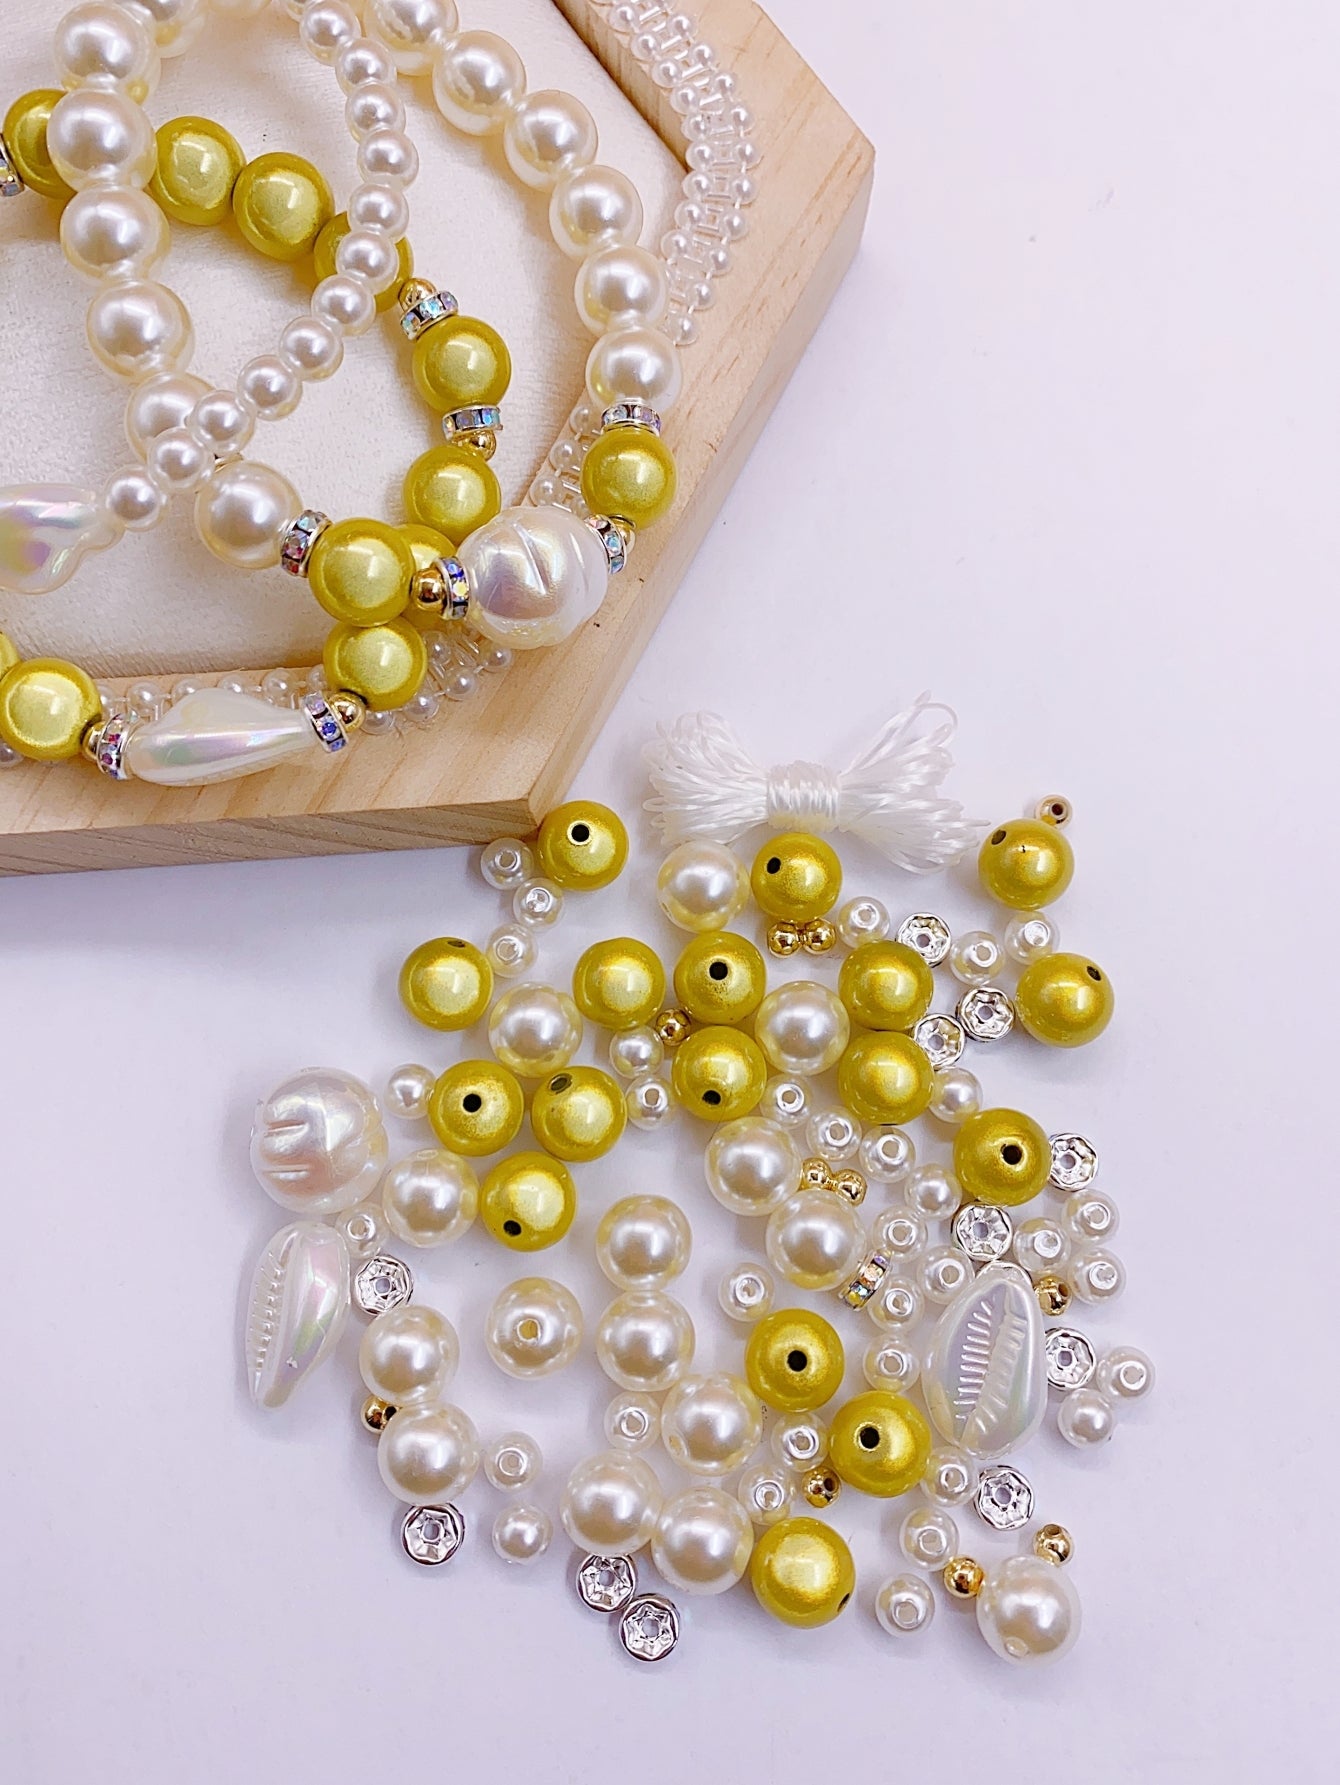 New multi-color mixed multi-layer wear pearl string jewelry accessories Pearl diy accessories bead material loose bead material bag